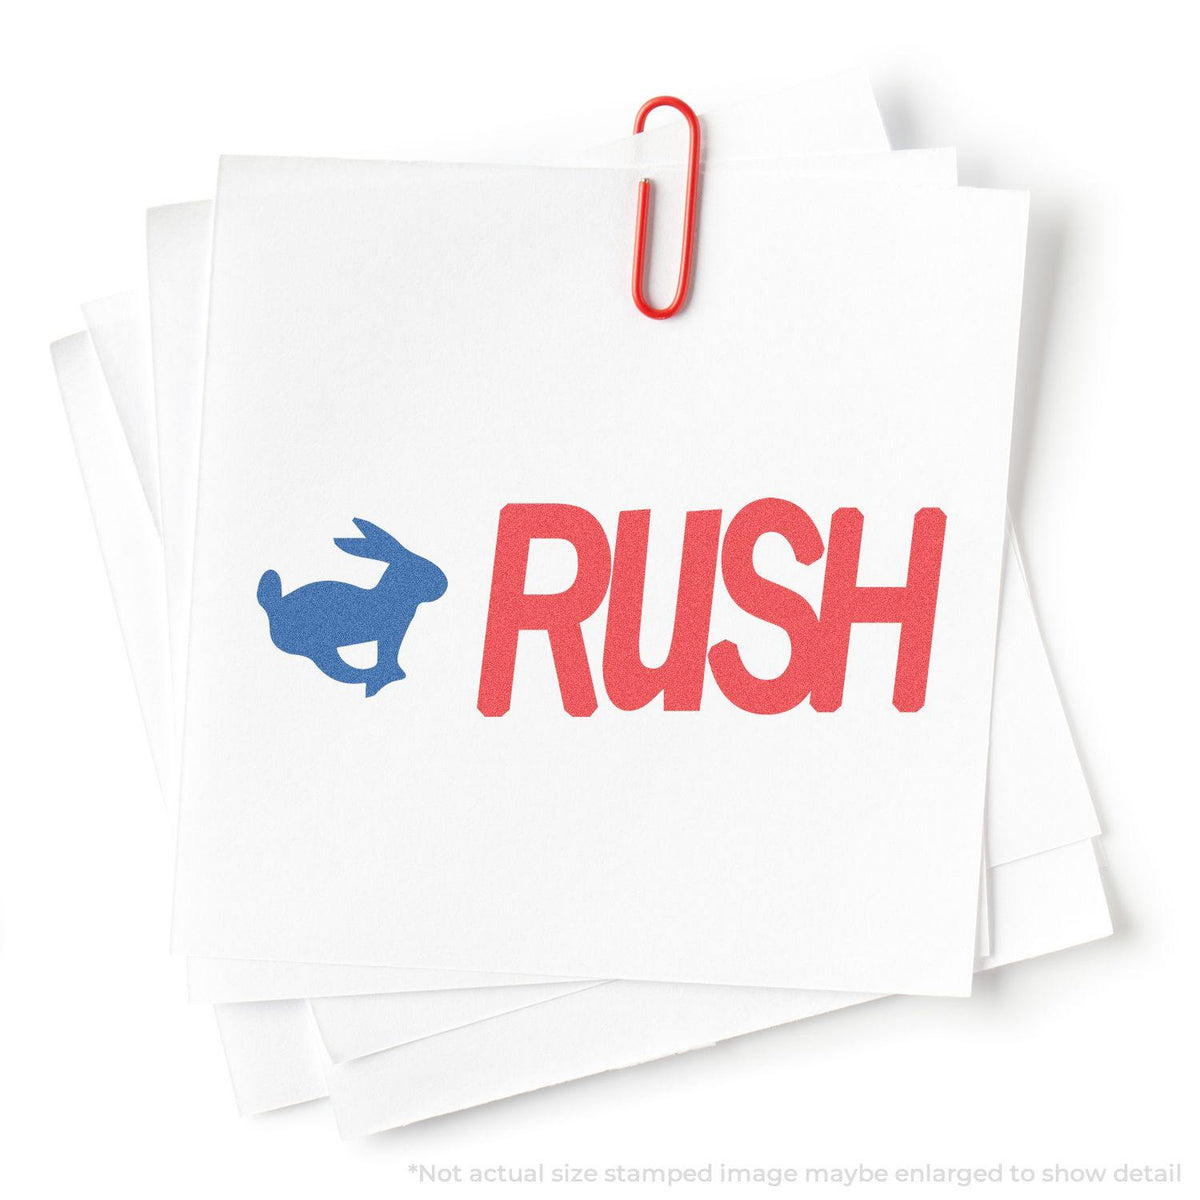 In Use Photo of Two-color Rush Xstamper Stamp